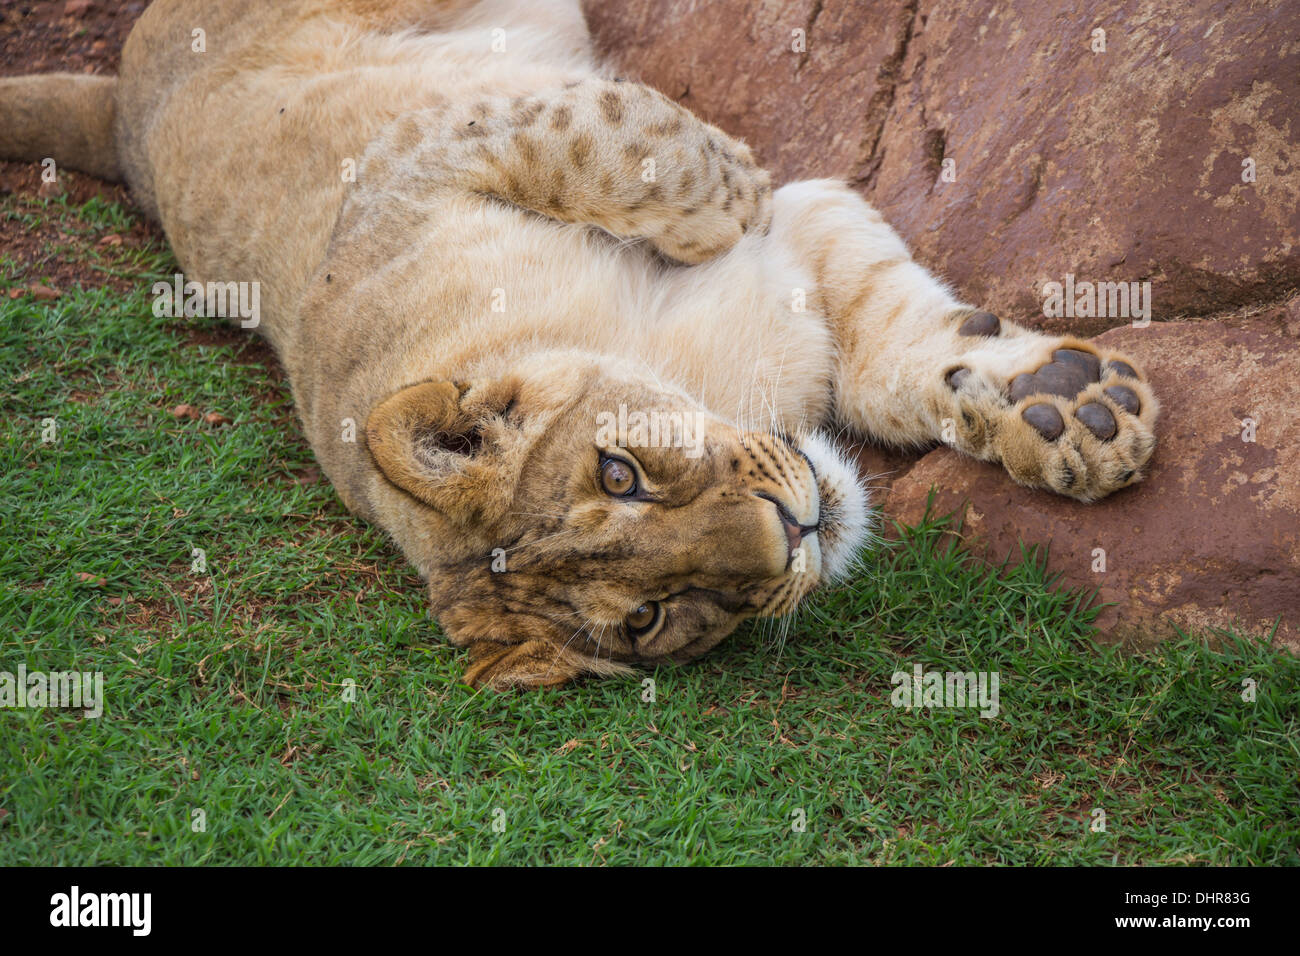 Lion Cub Waking Up After Resting Stock Photo